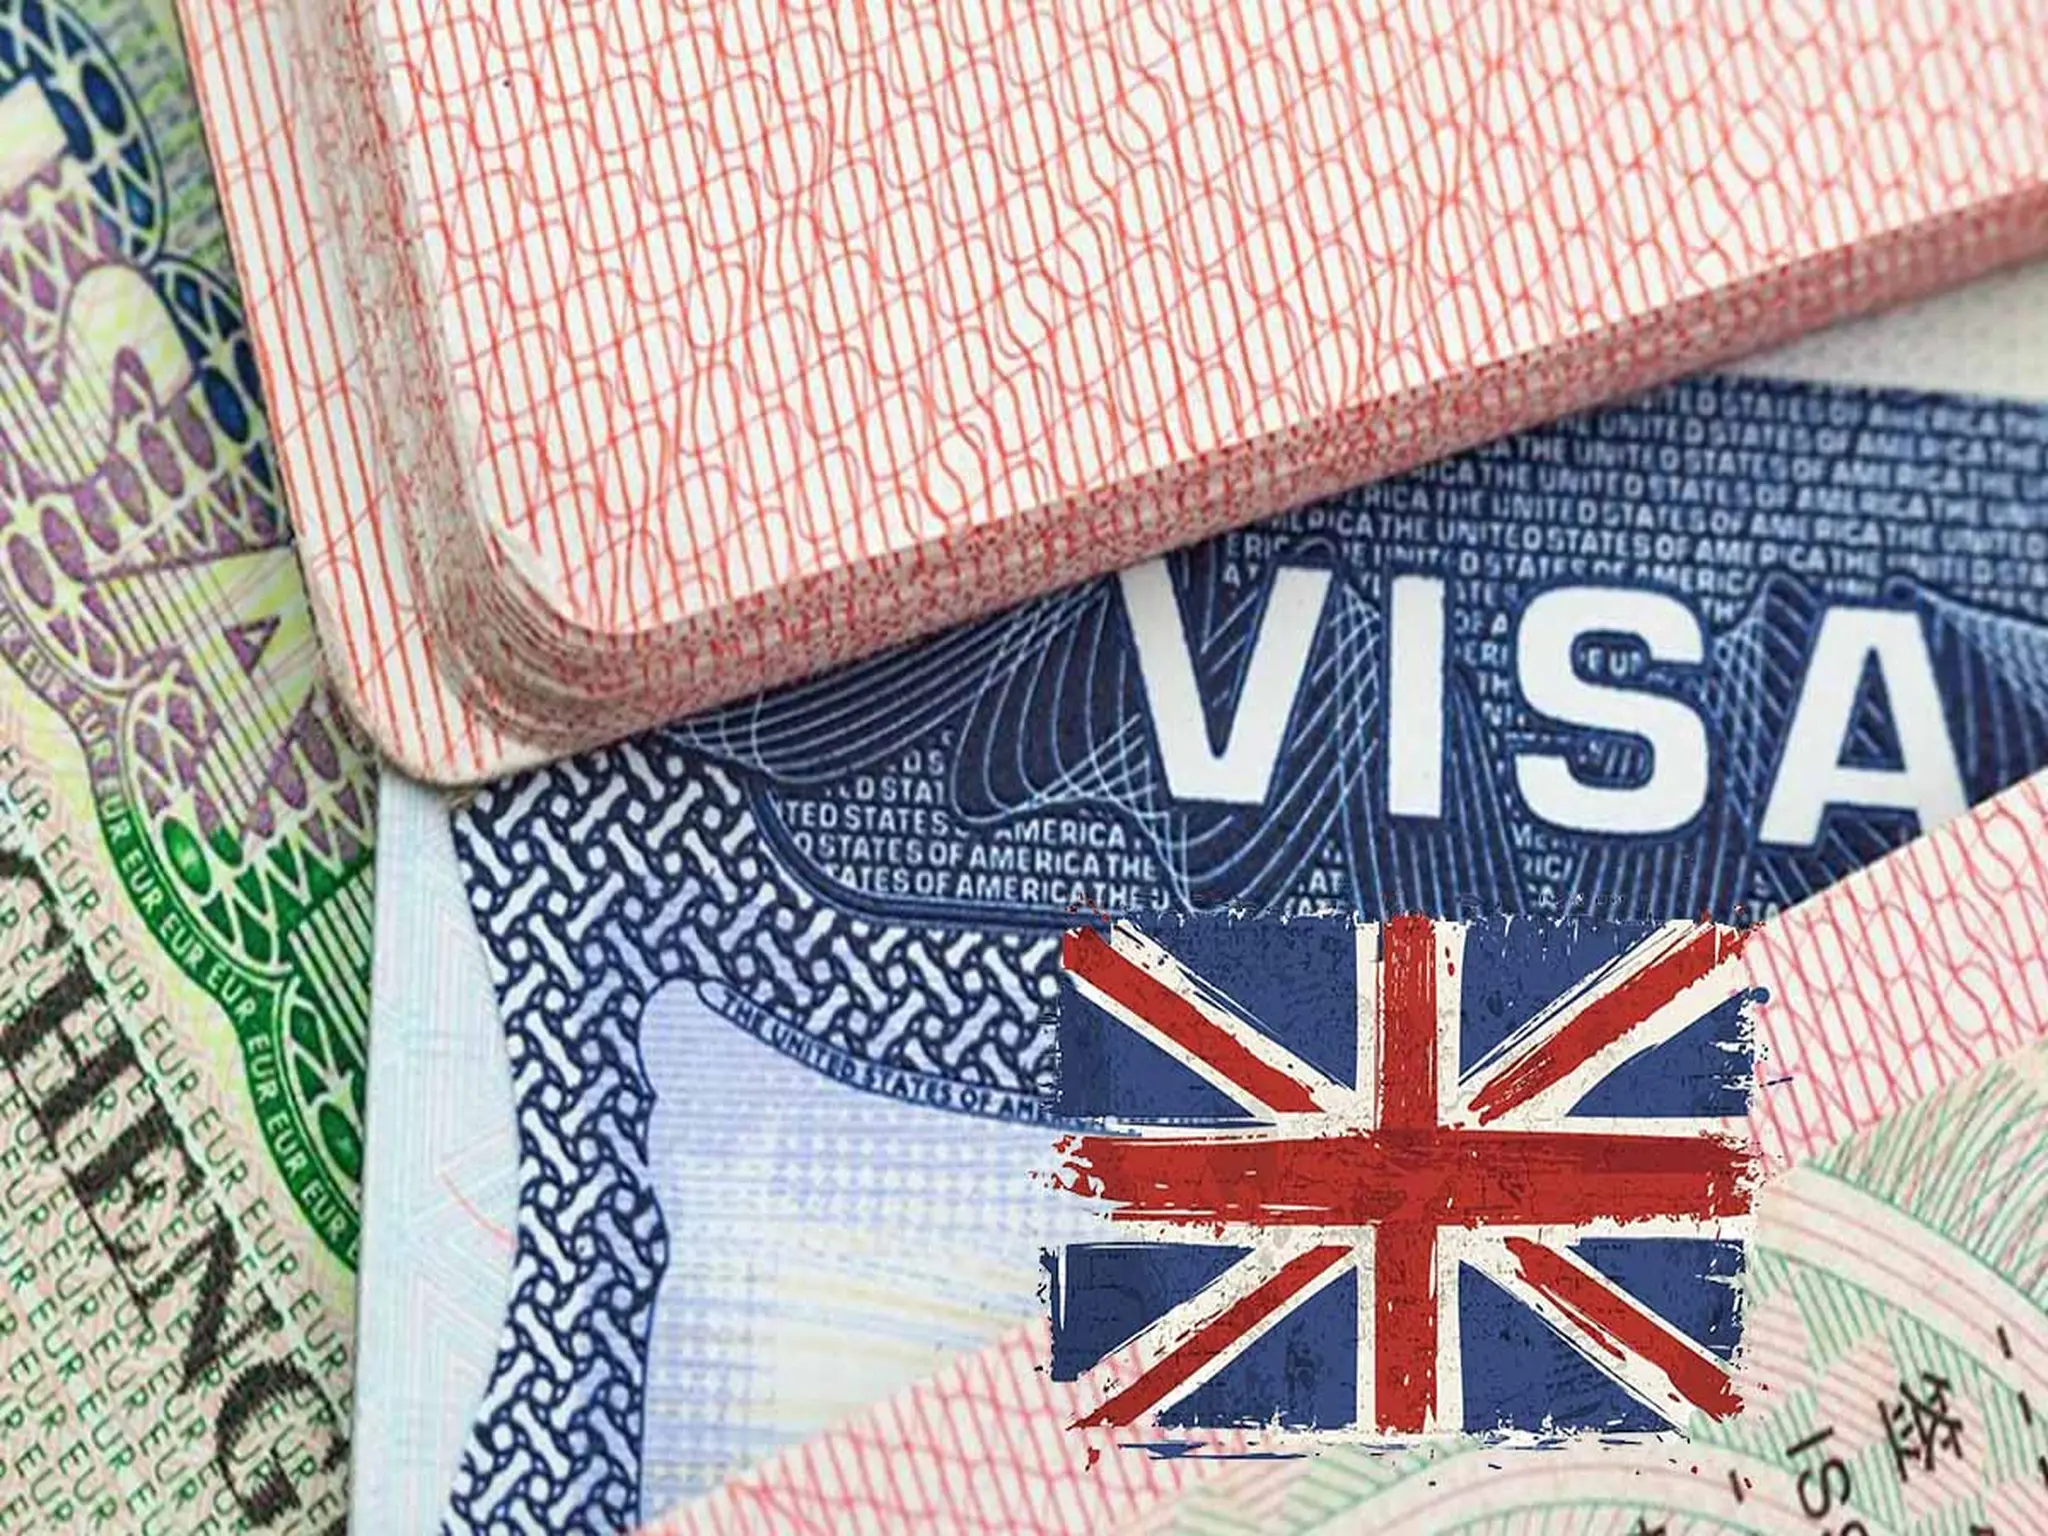 Britain announces new visa rules allowing tourists to work